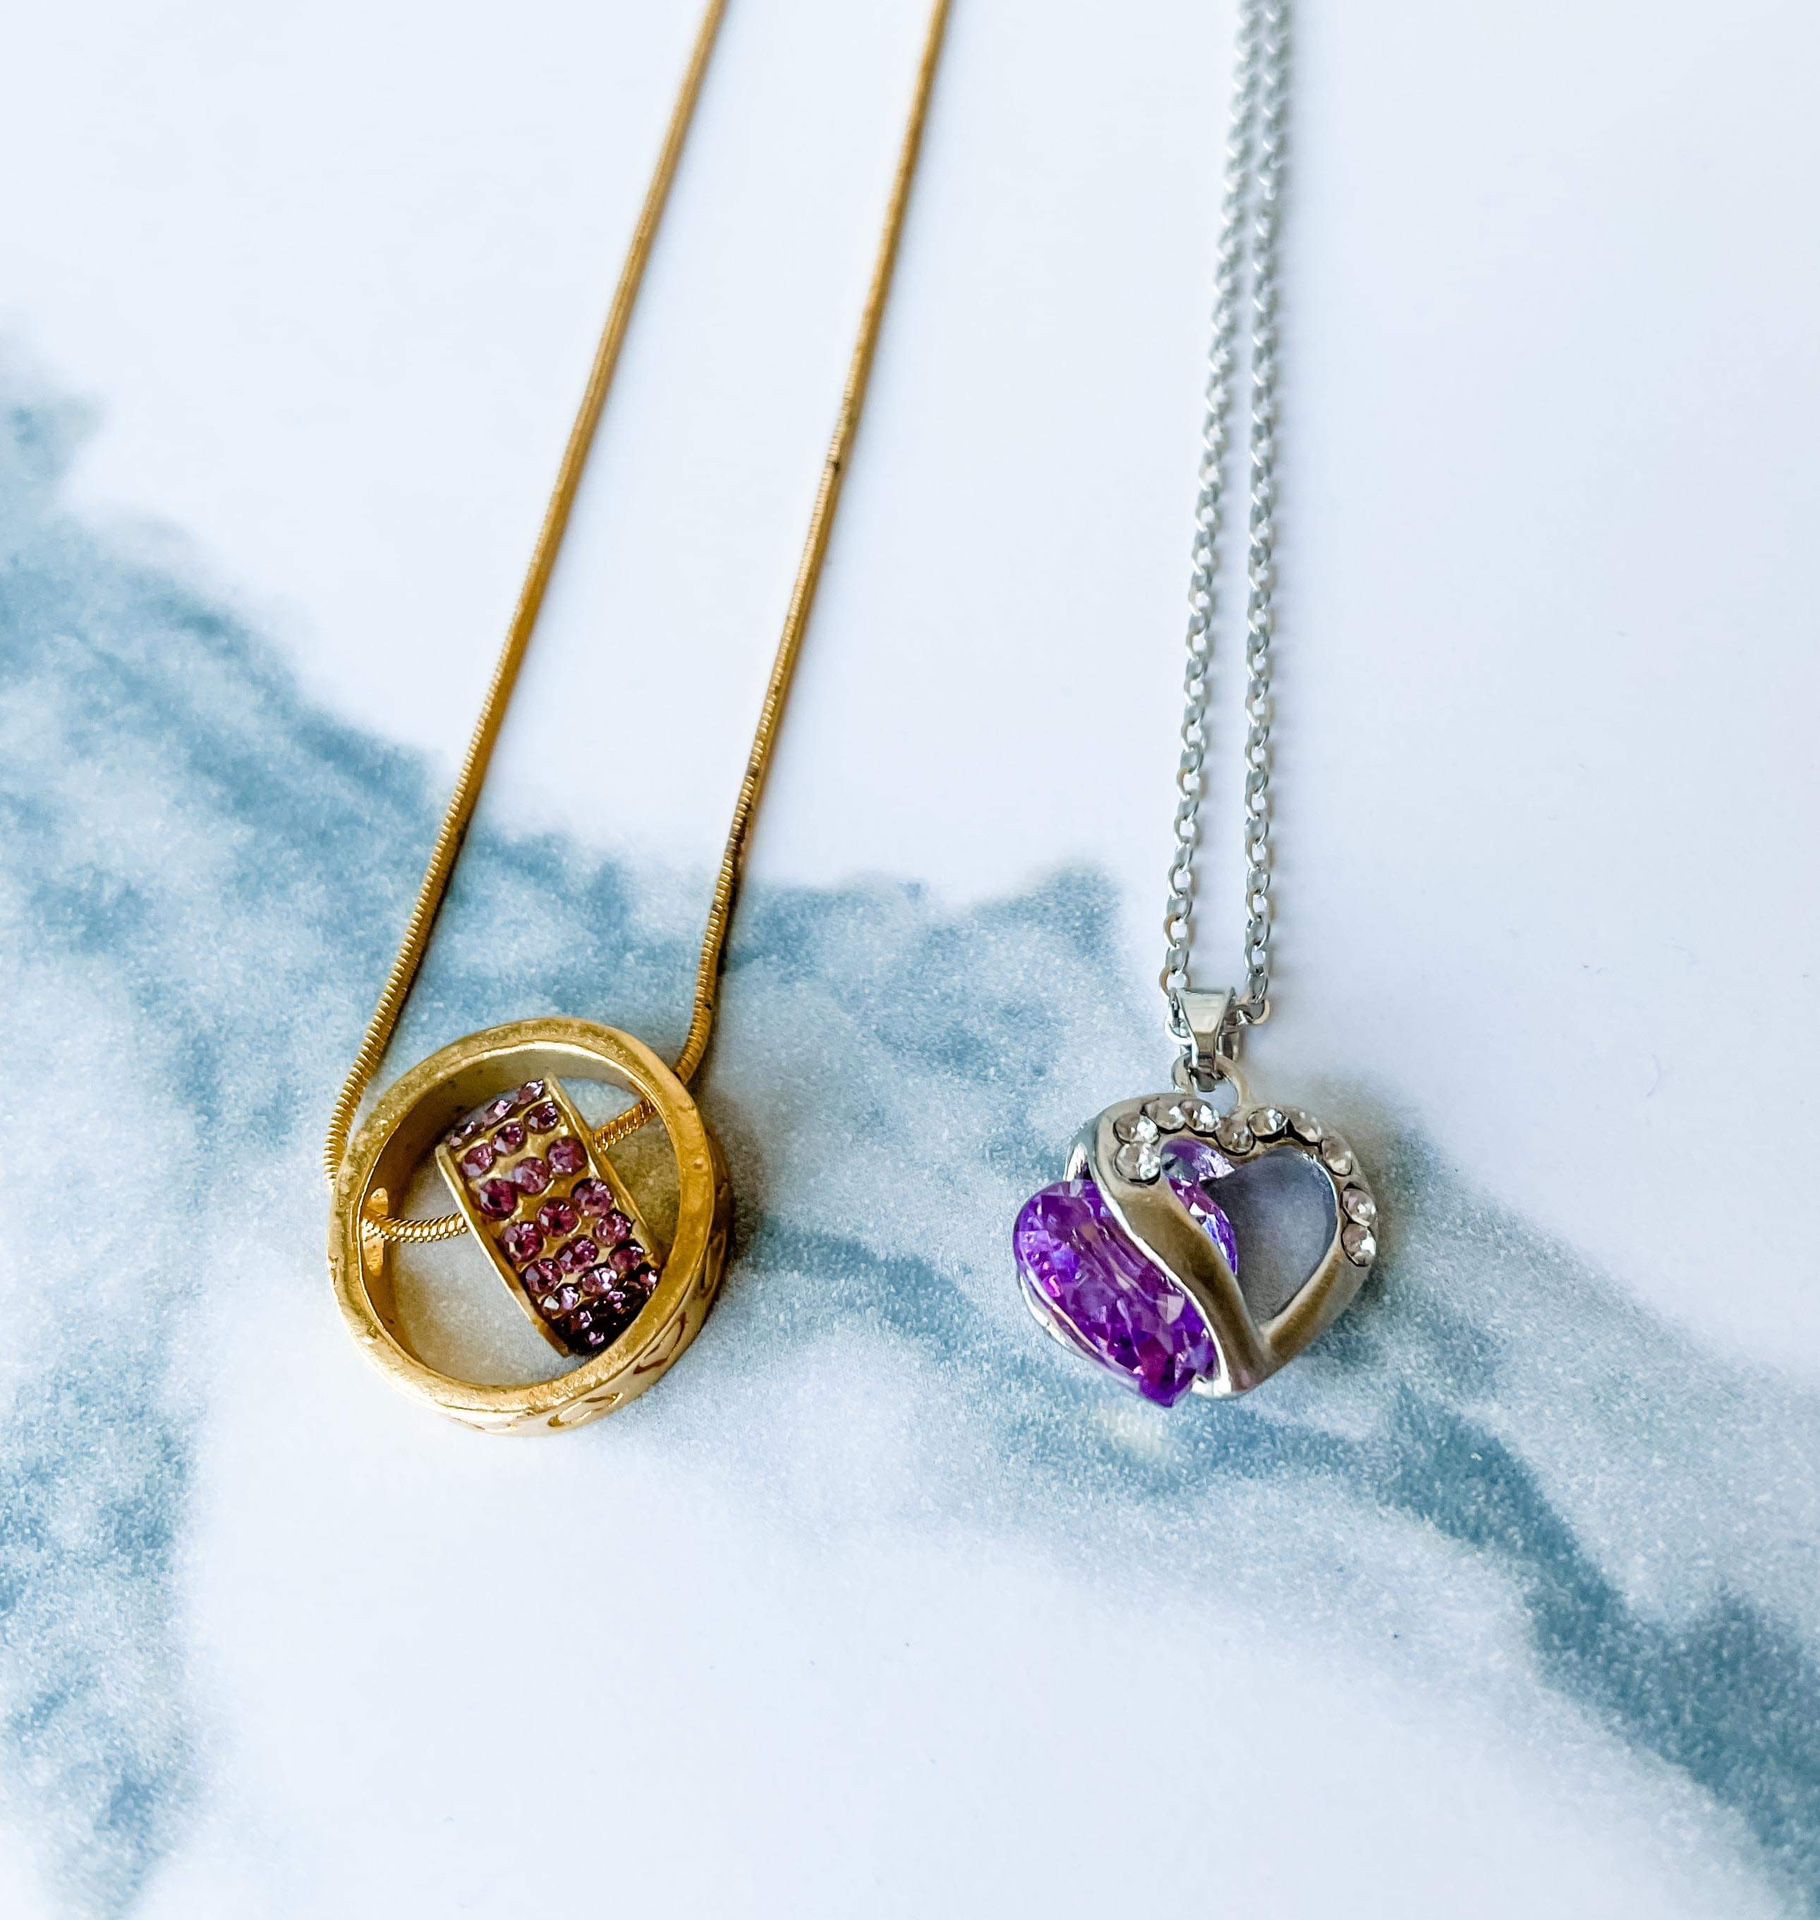 Two necklaces with purple gemstones